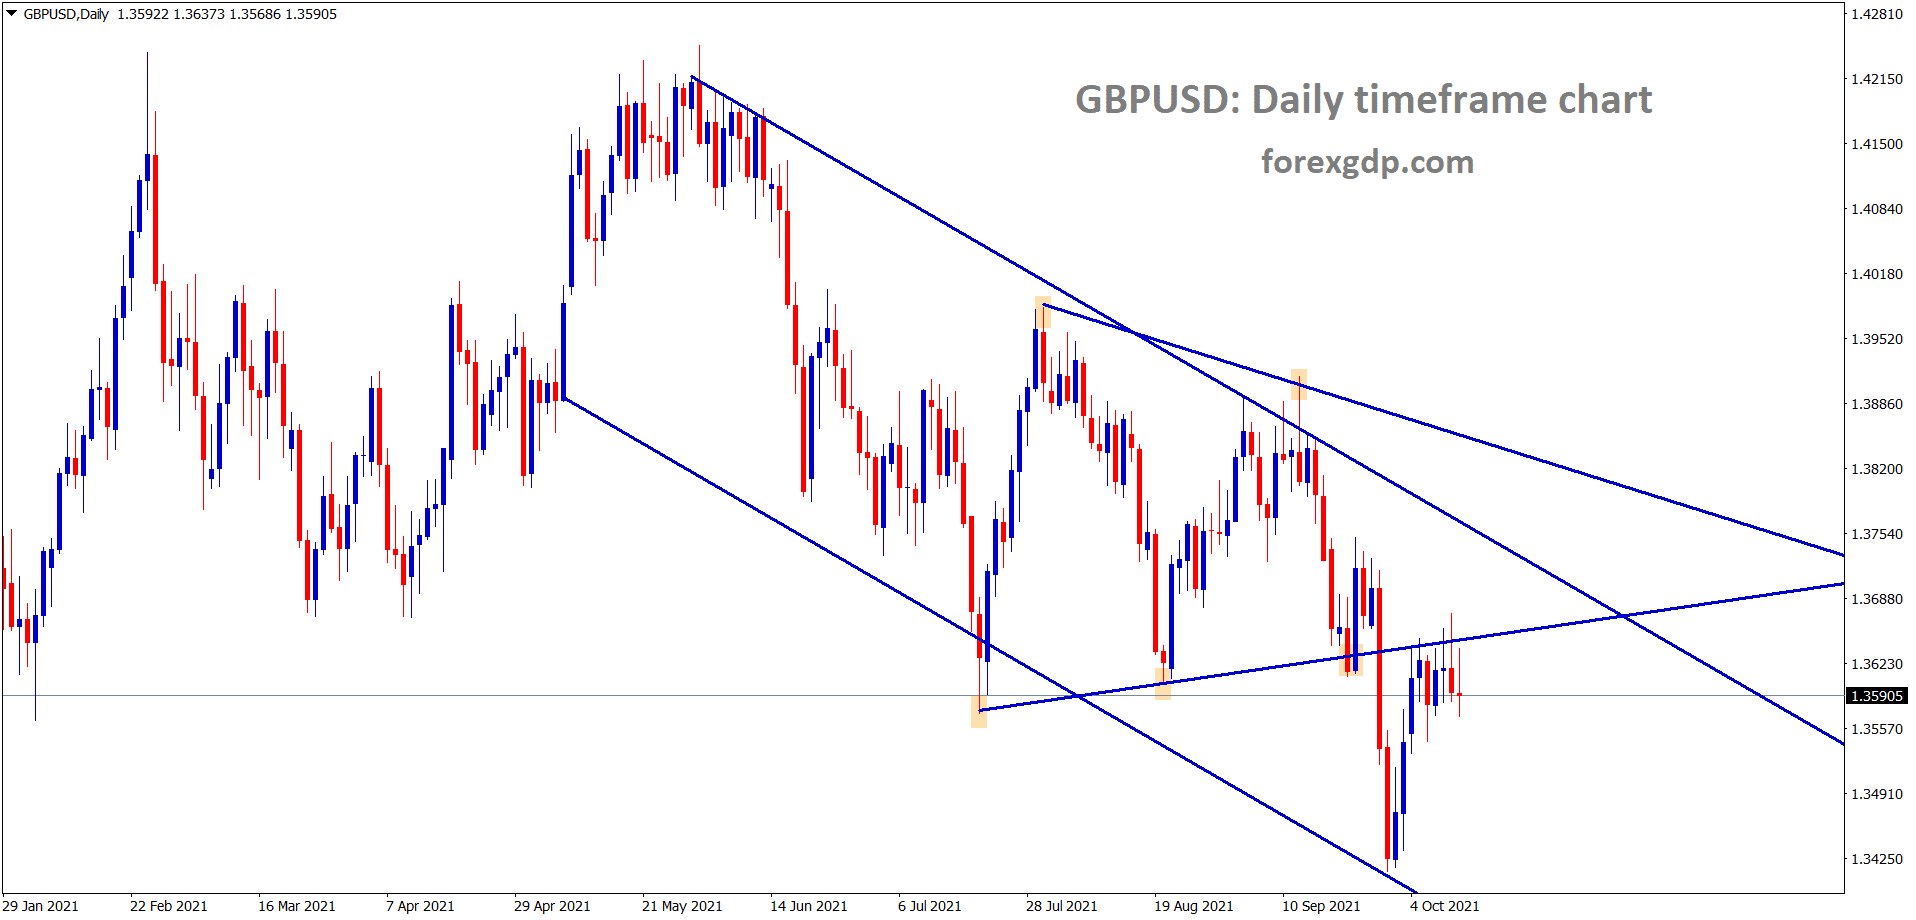 GBPUSD is standing at the retest area of the symmetrical triangle pattern